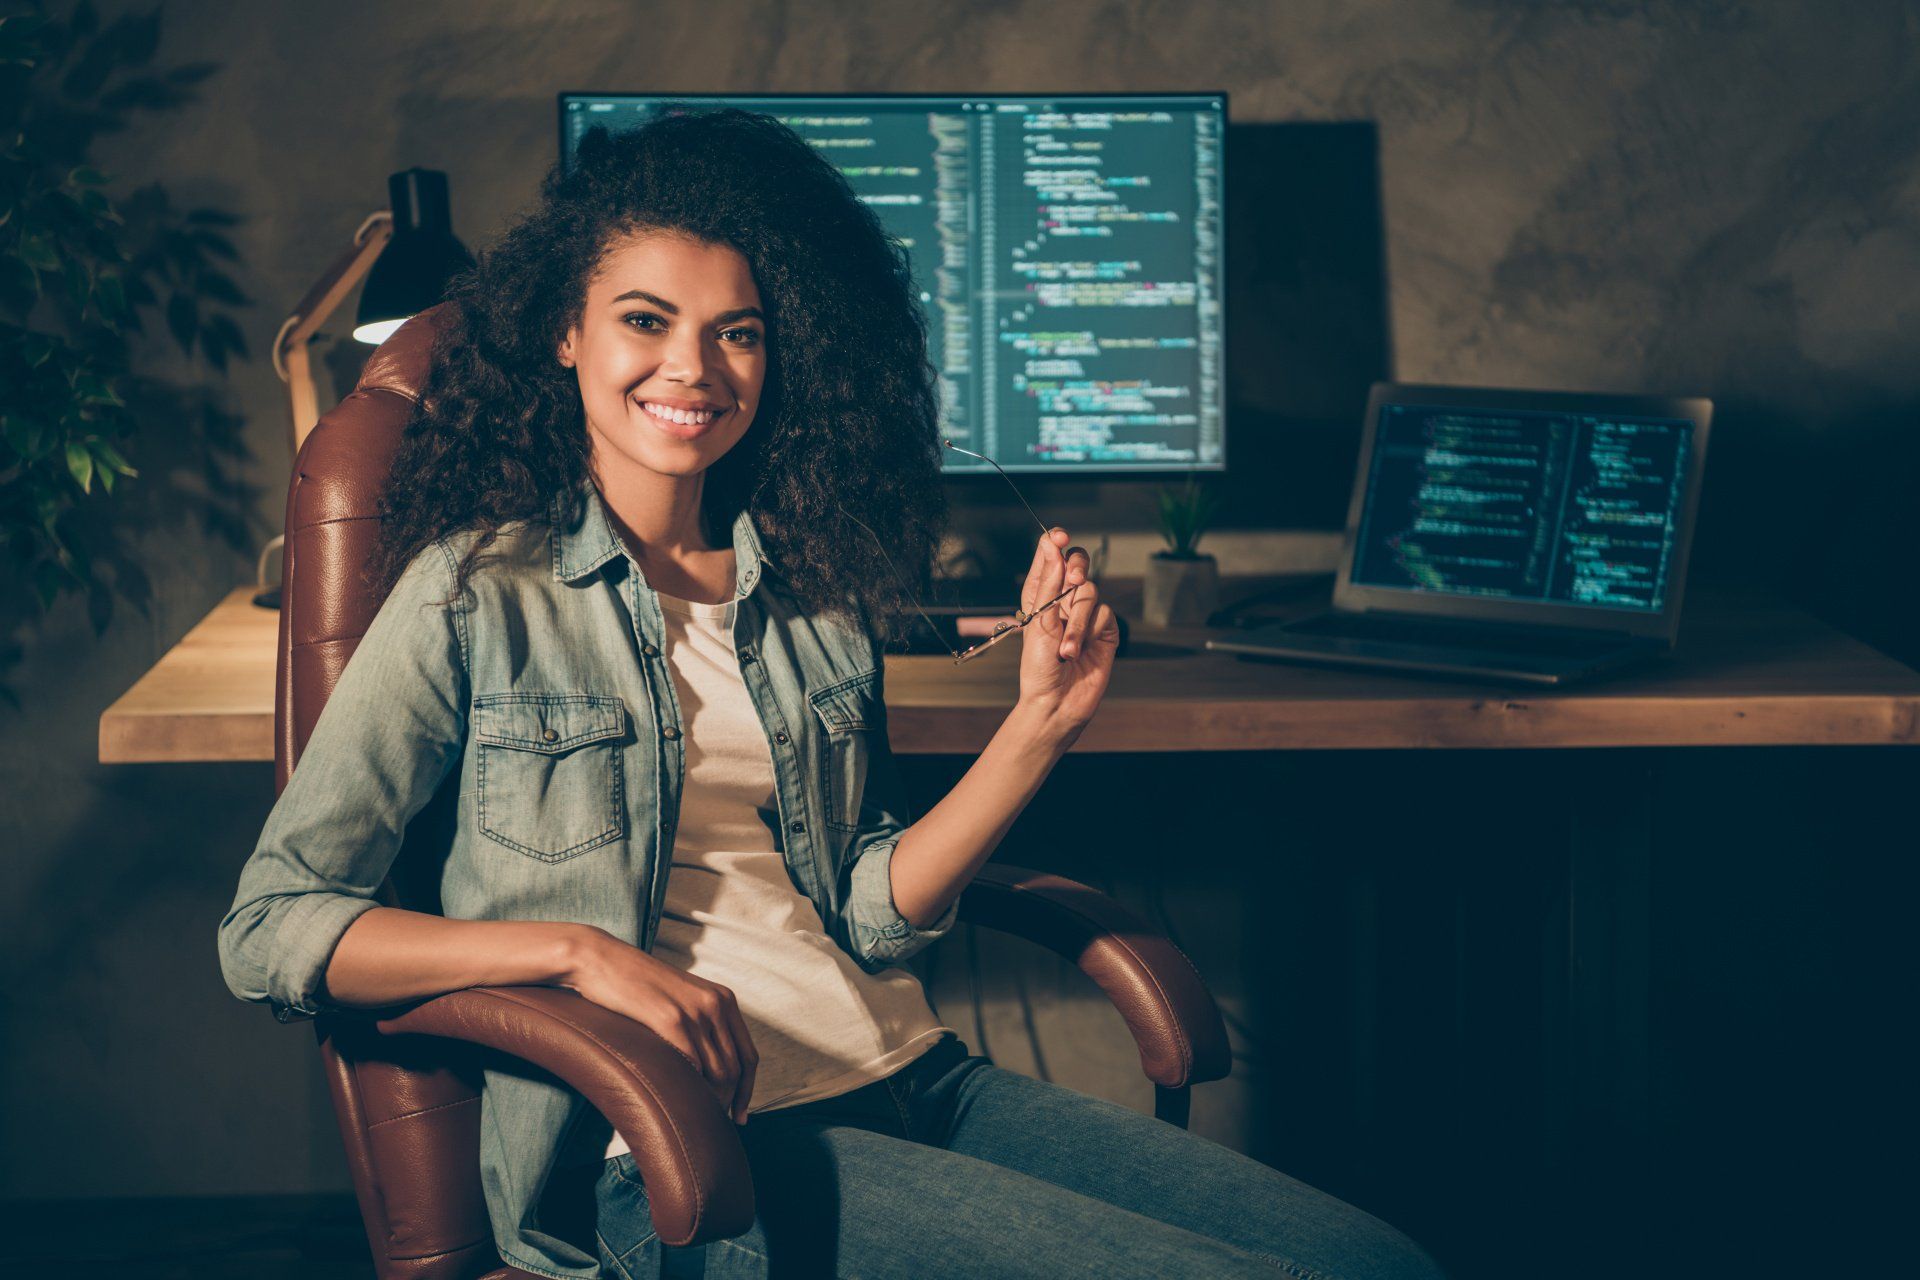 Woman with curly hair holding eye glasses with computer monitors behind her showing code